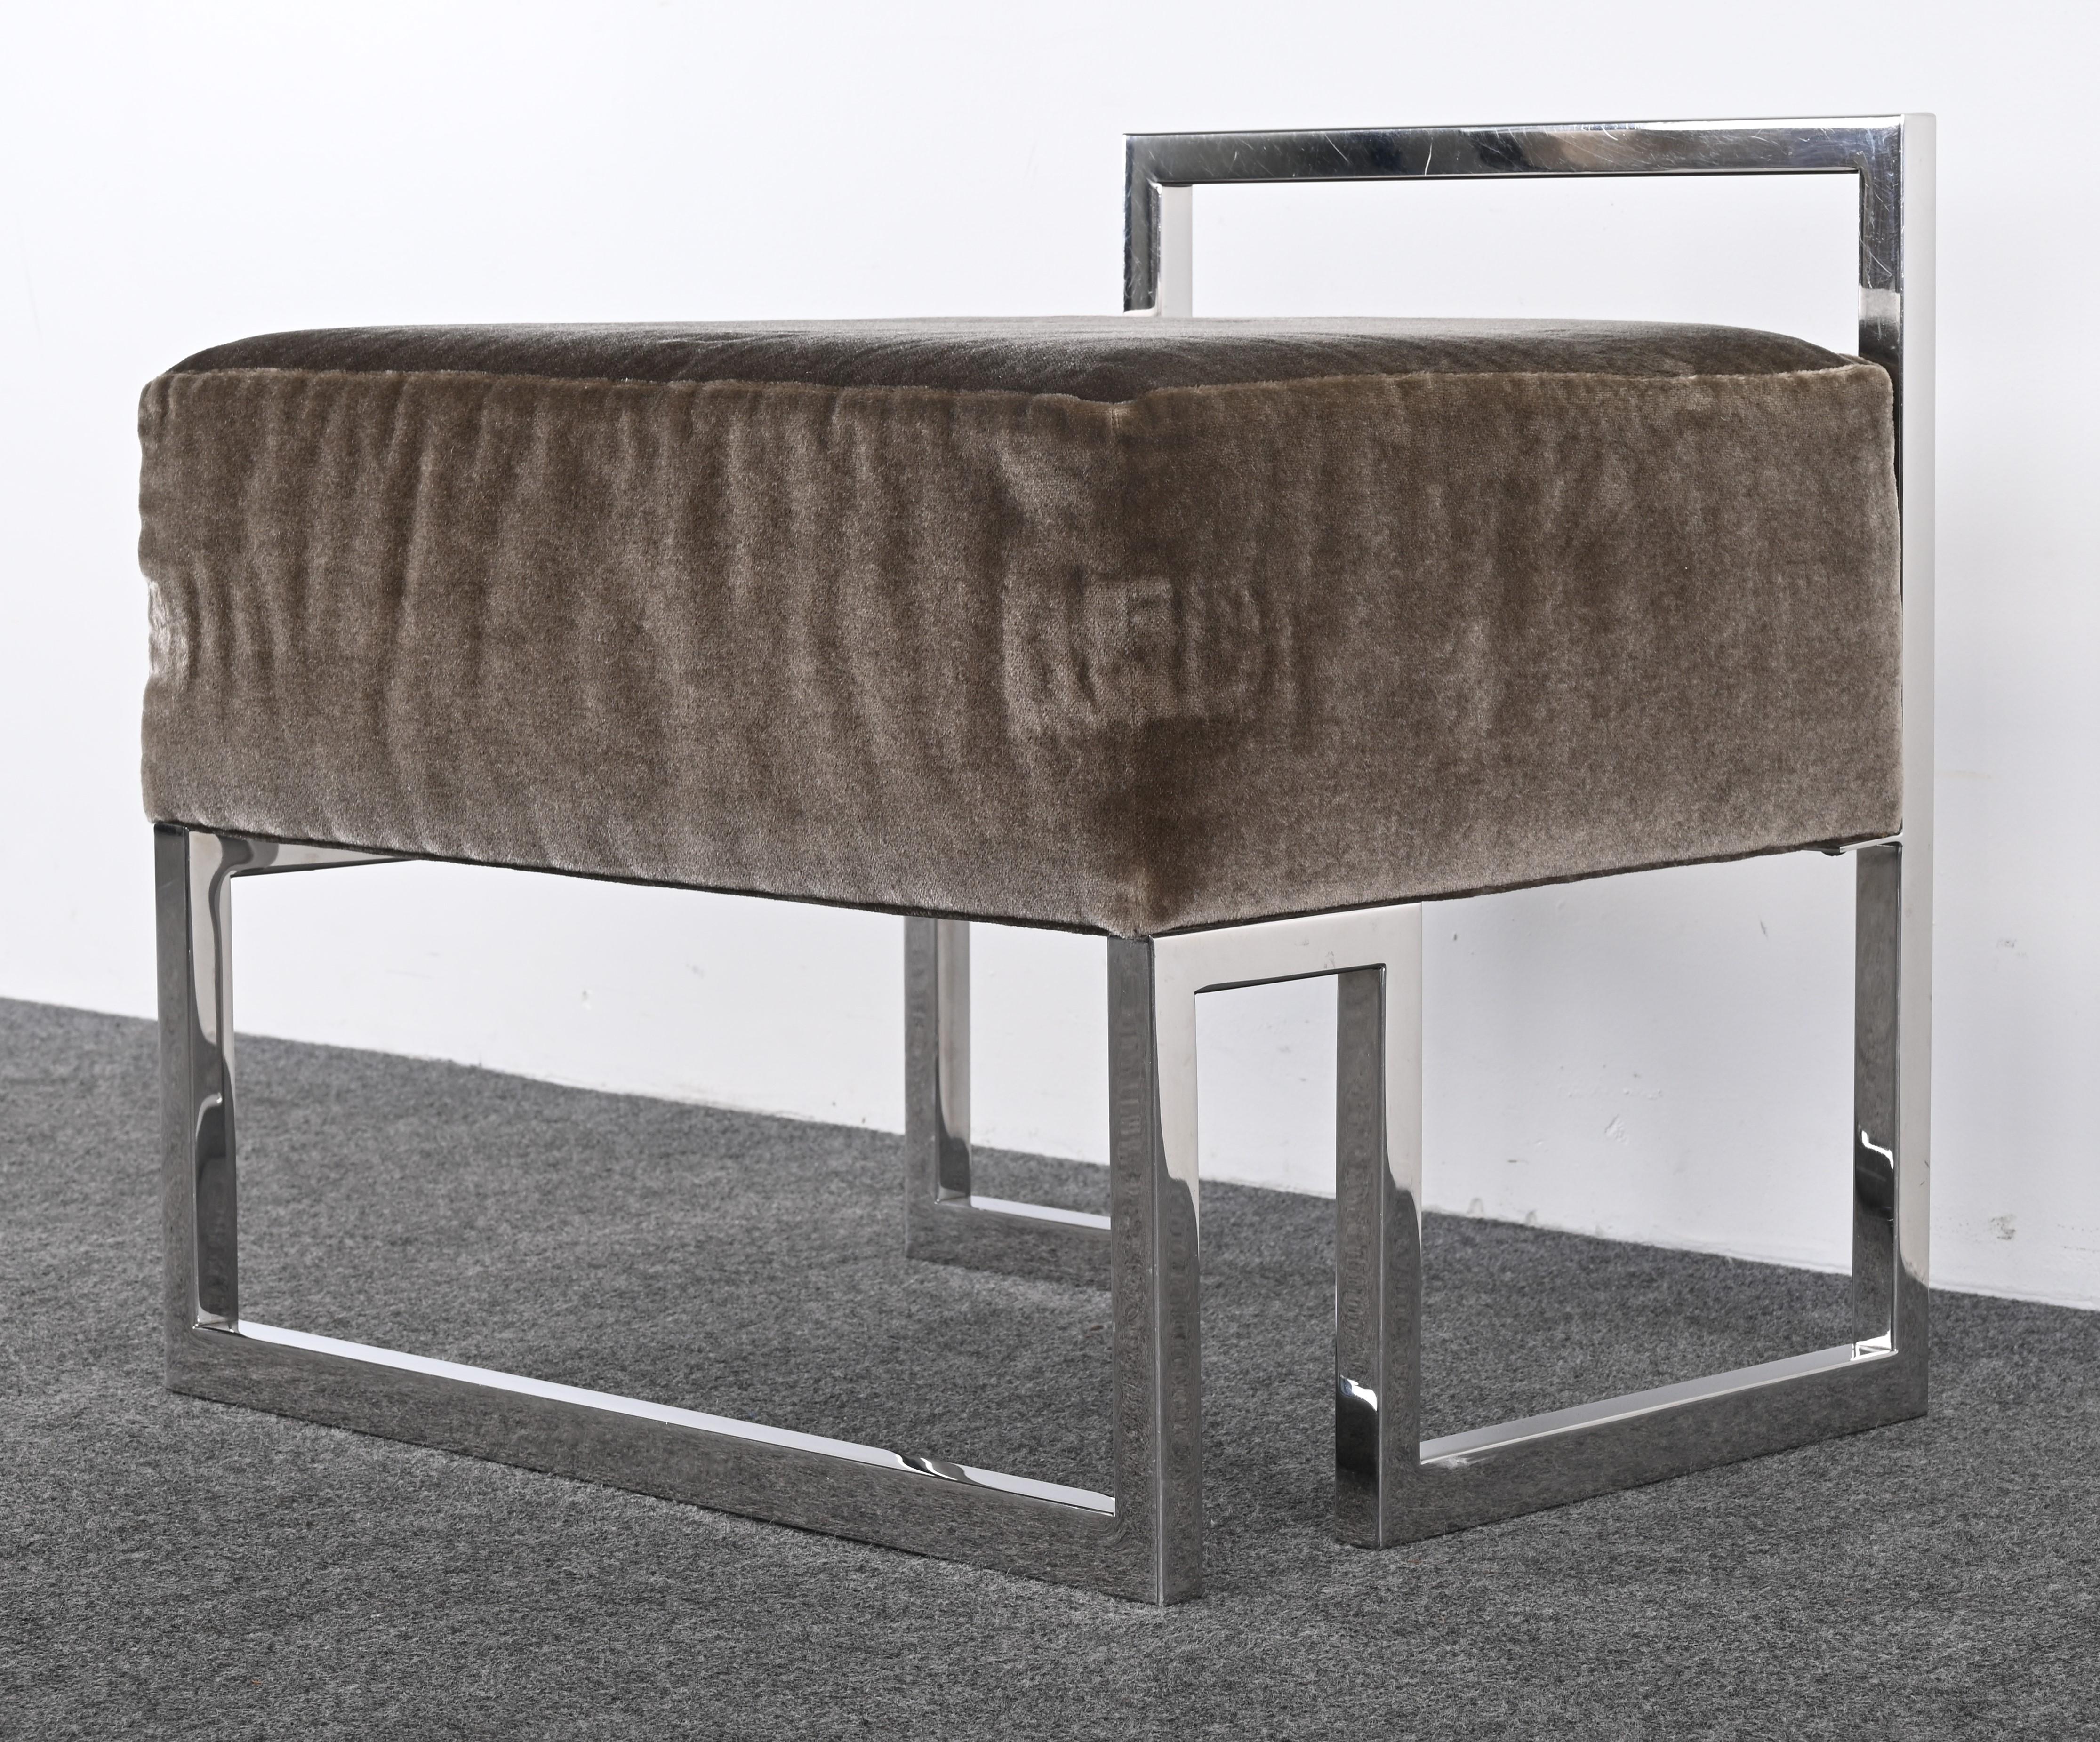 Modern Stainless Steel Bench by Vladimir Kagan for Gucci, 1990s For Sale